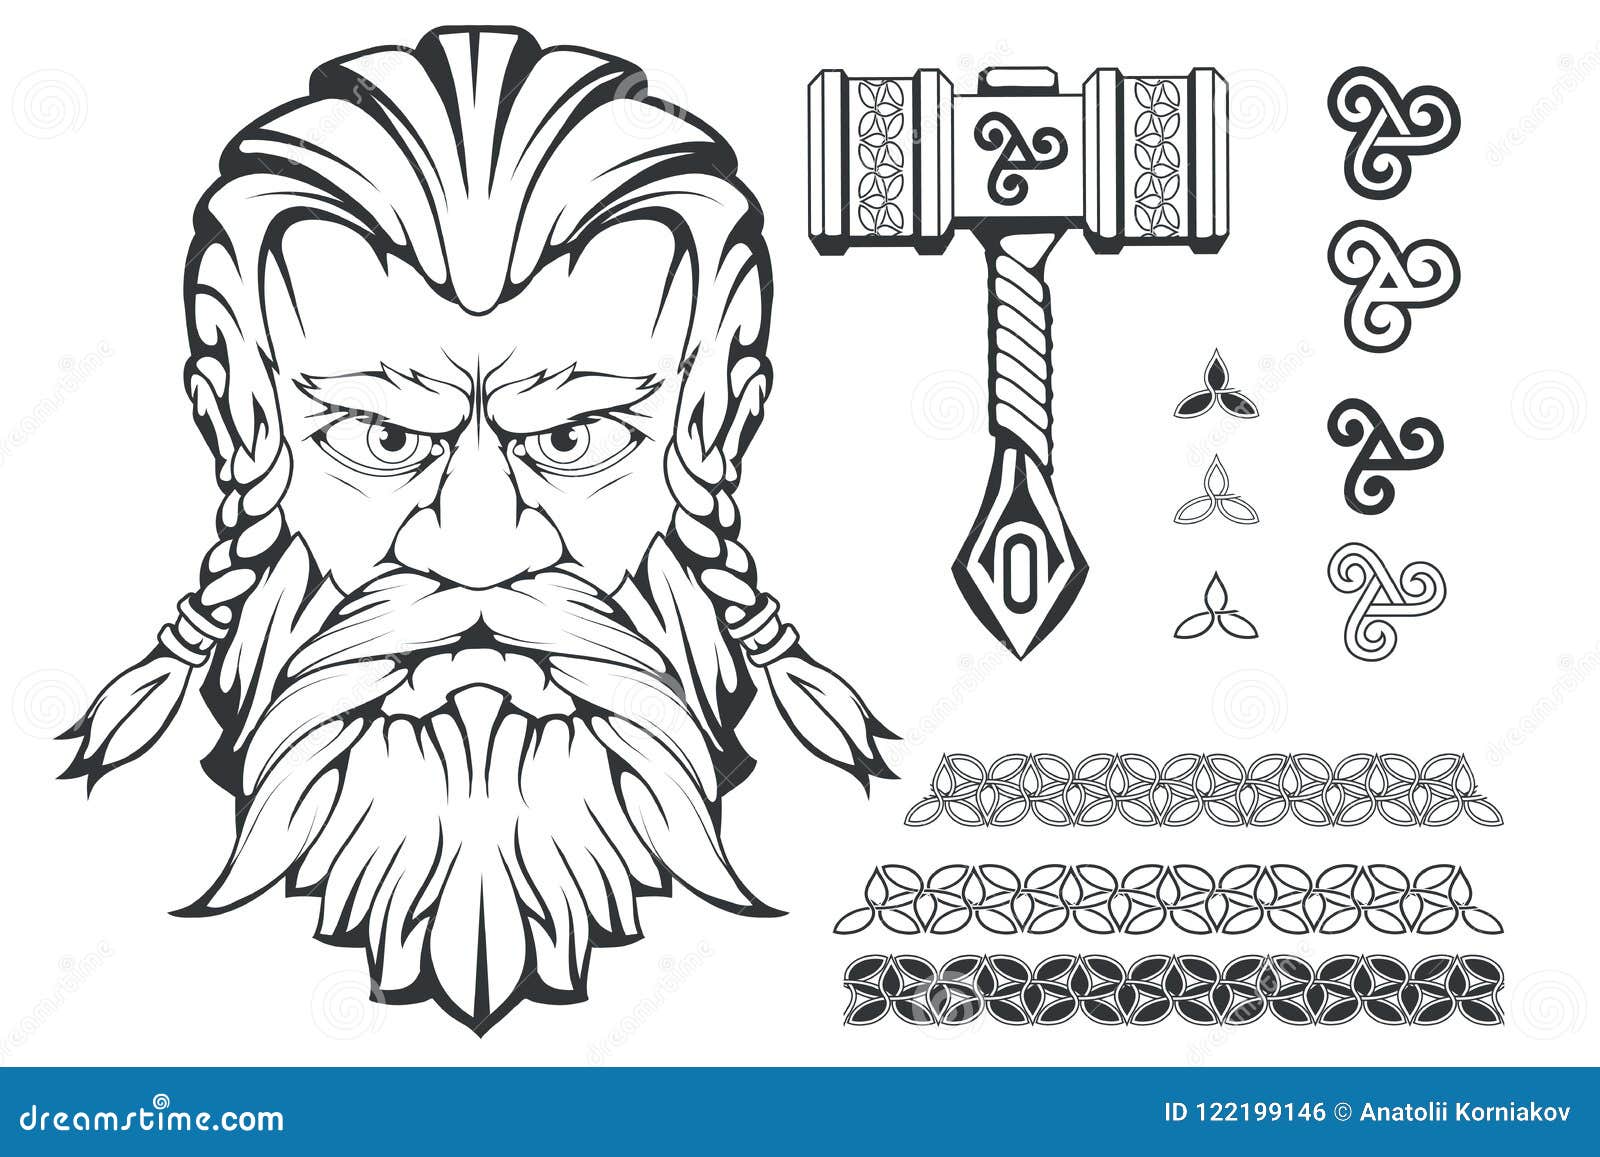 How To Draw Thors Hammer  Step By Step Thor Hammer Drawing PNG Image   Transparent PNG Free Download on SeekPNG